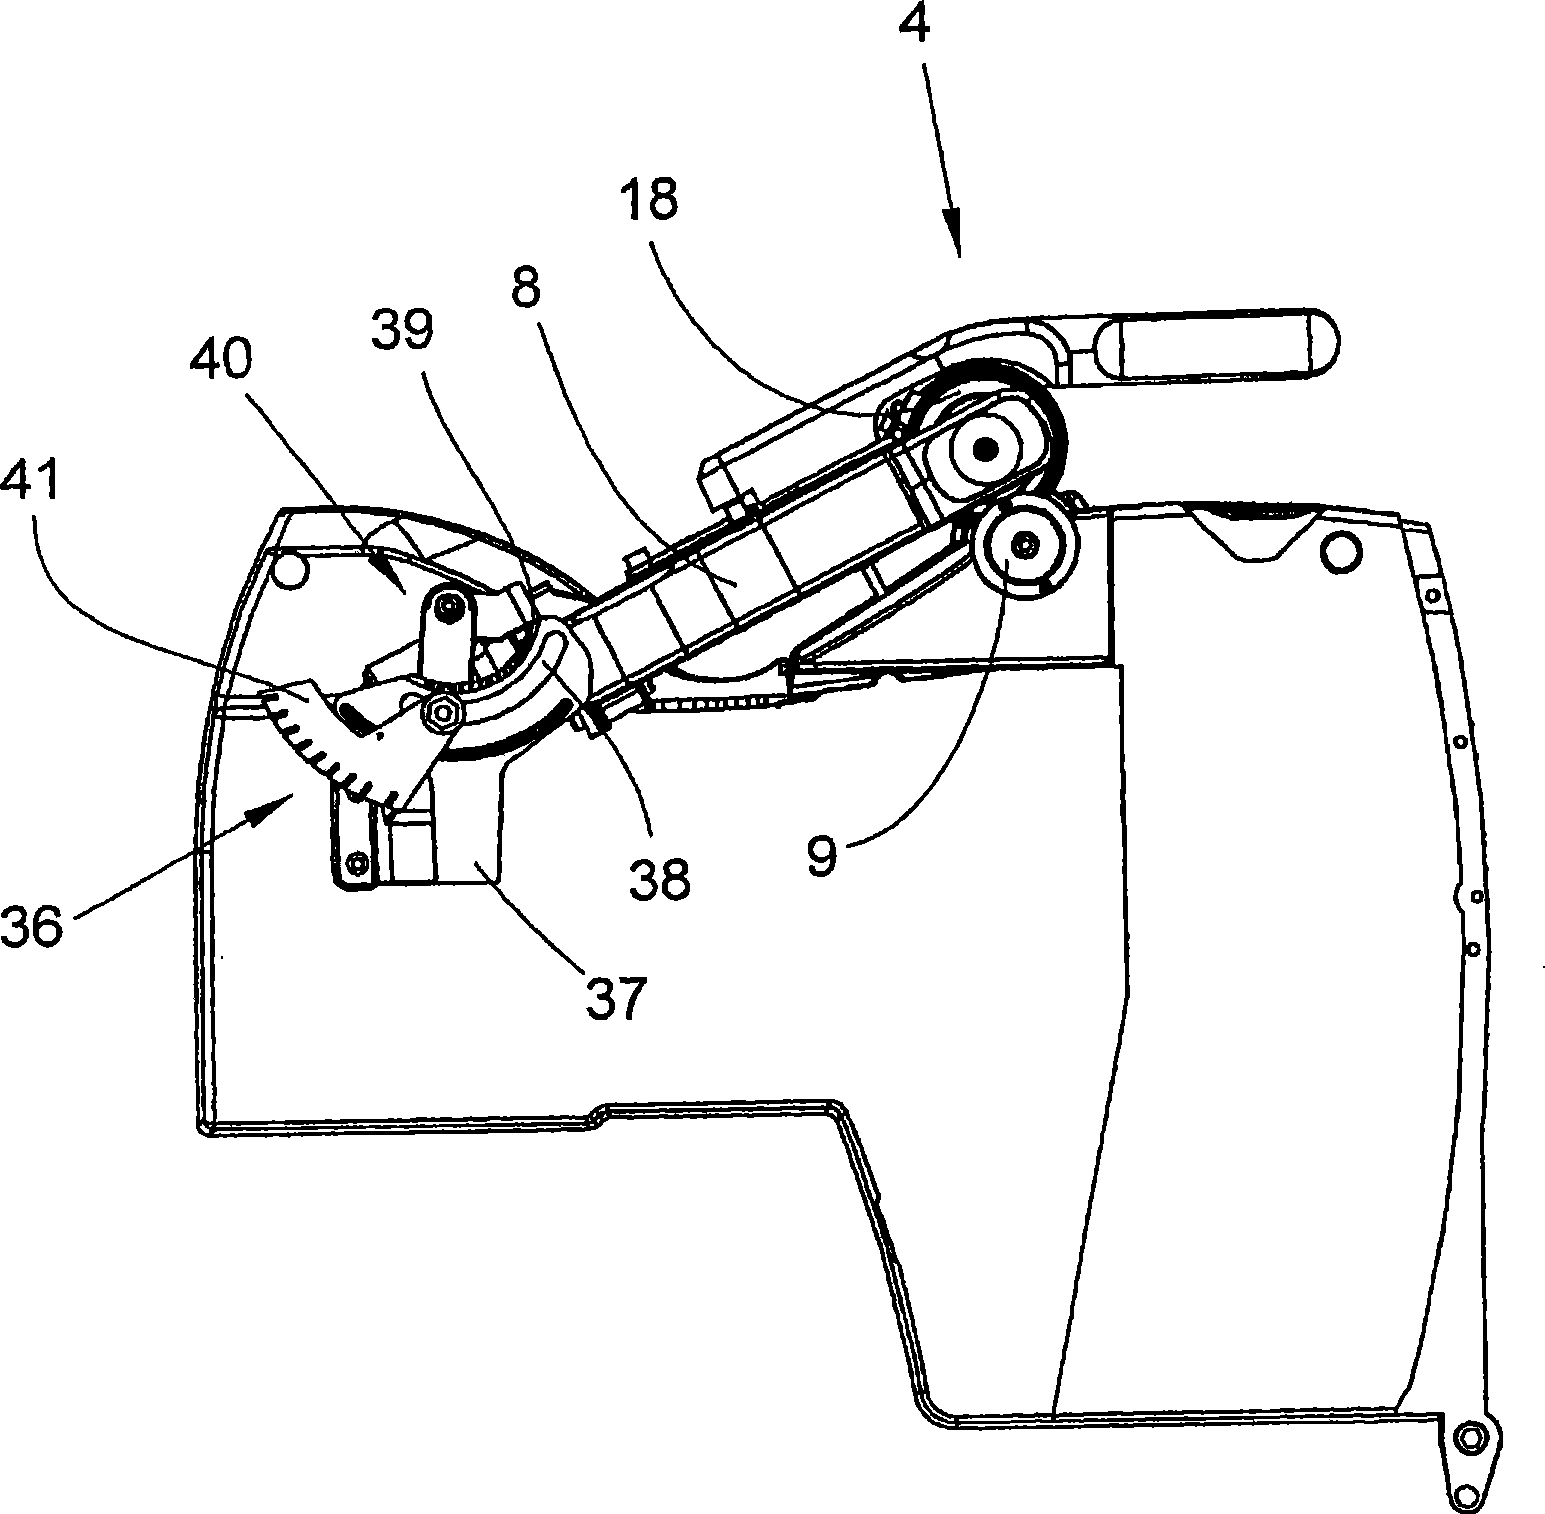 Method for winding yarn on bobbin to form intersected coiled bobbin